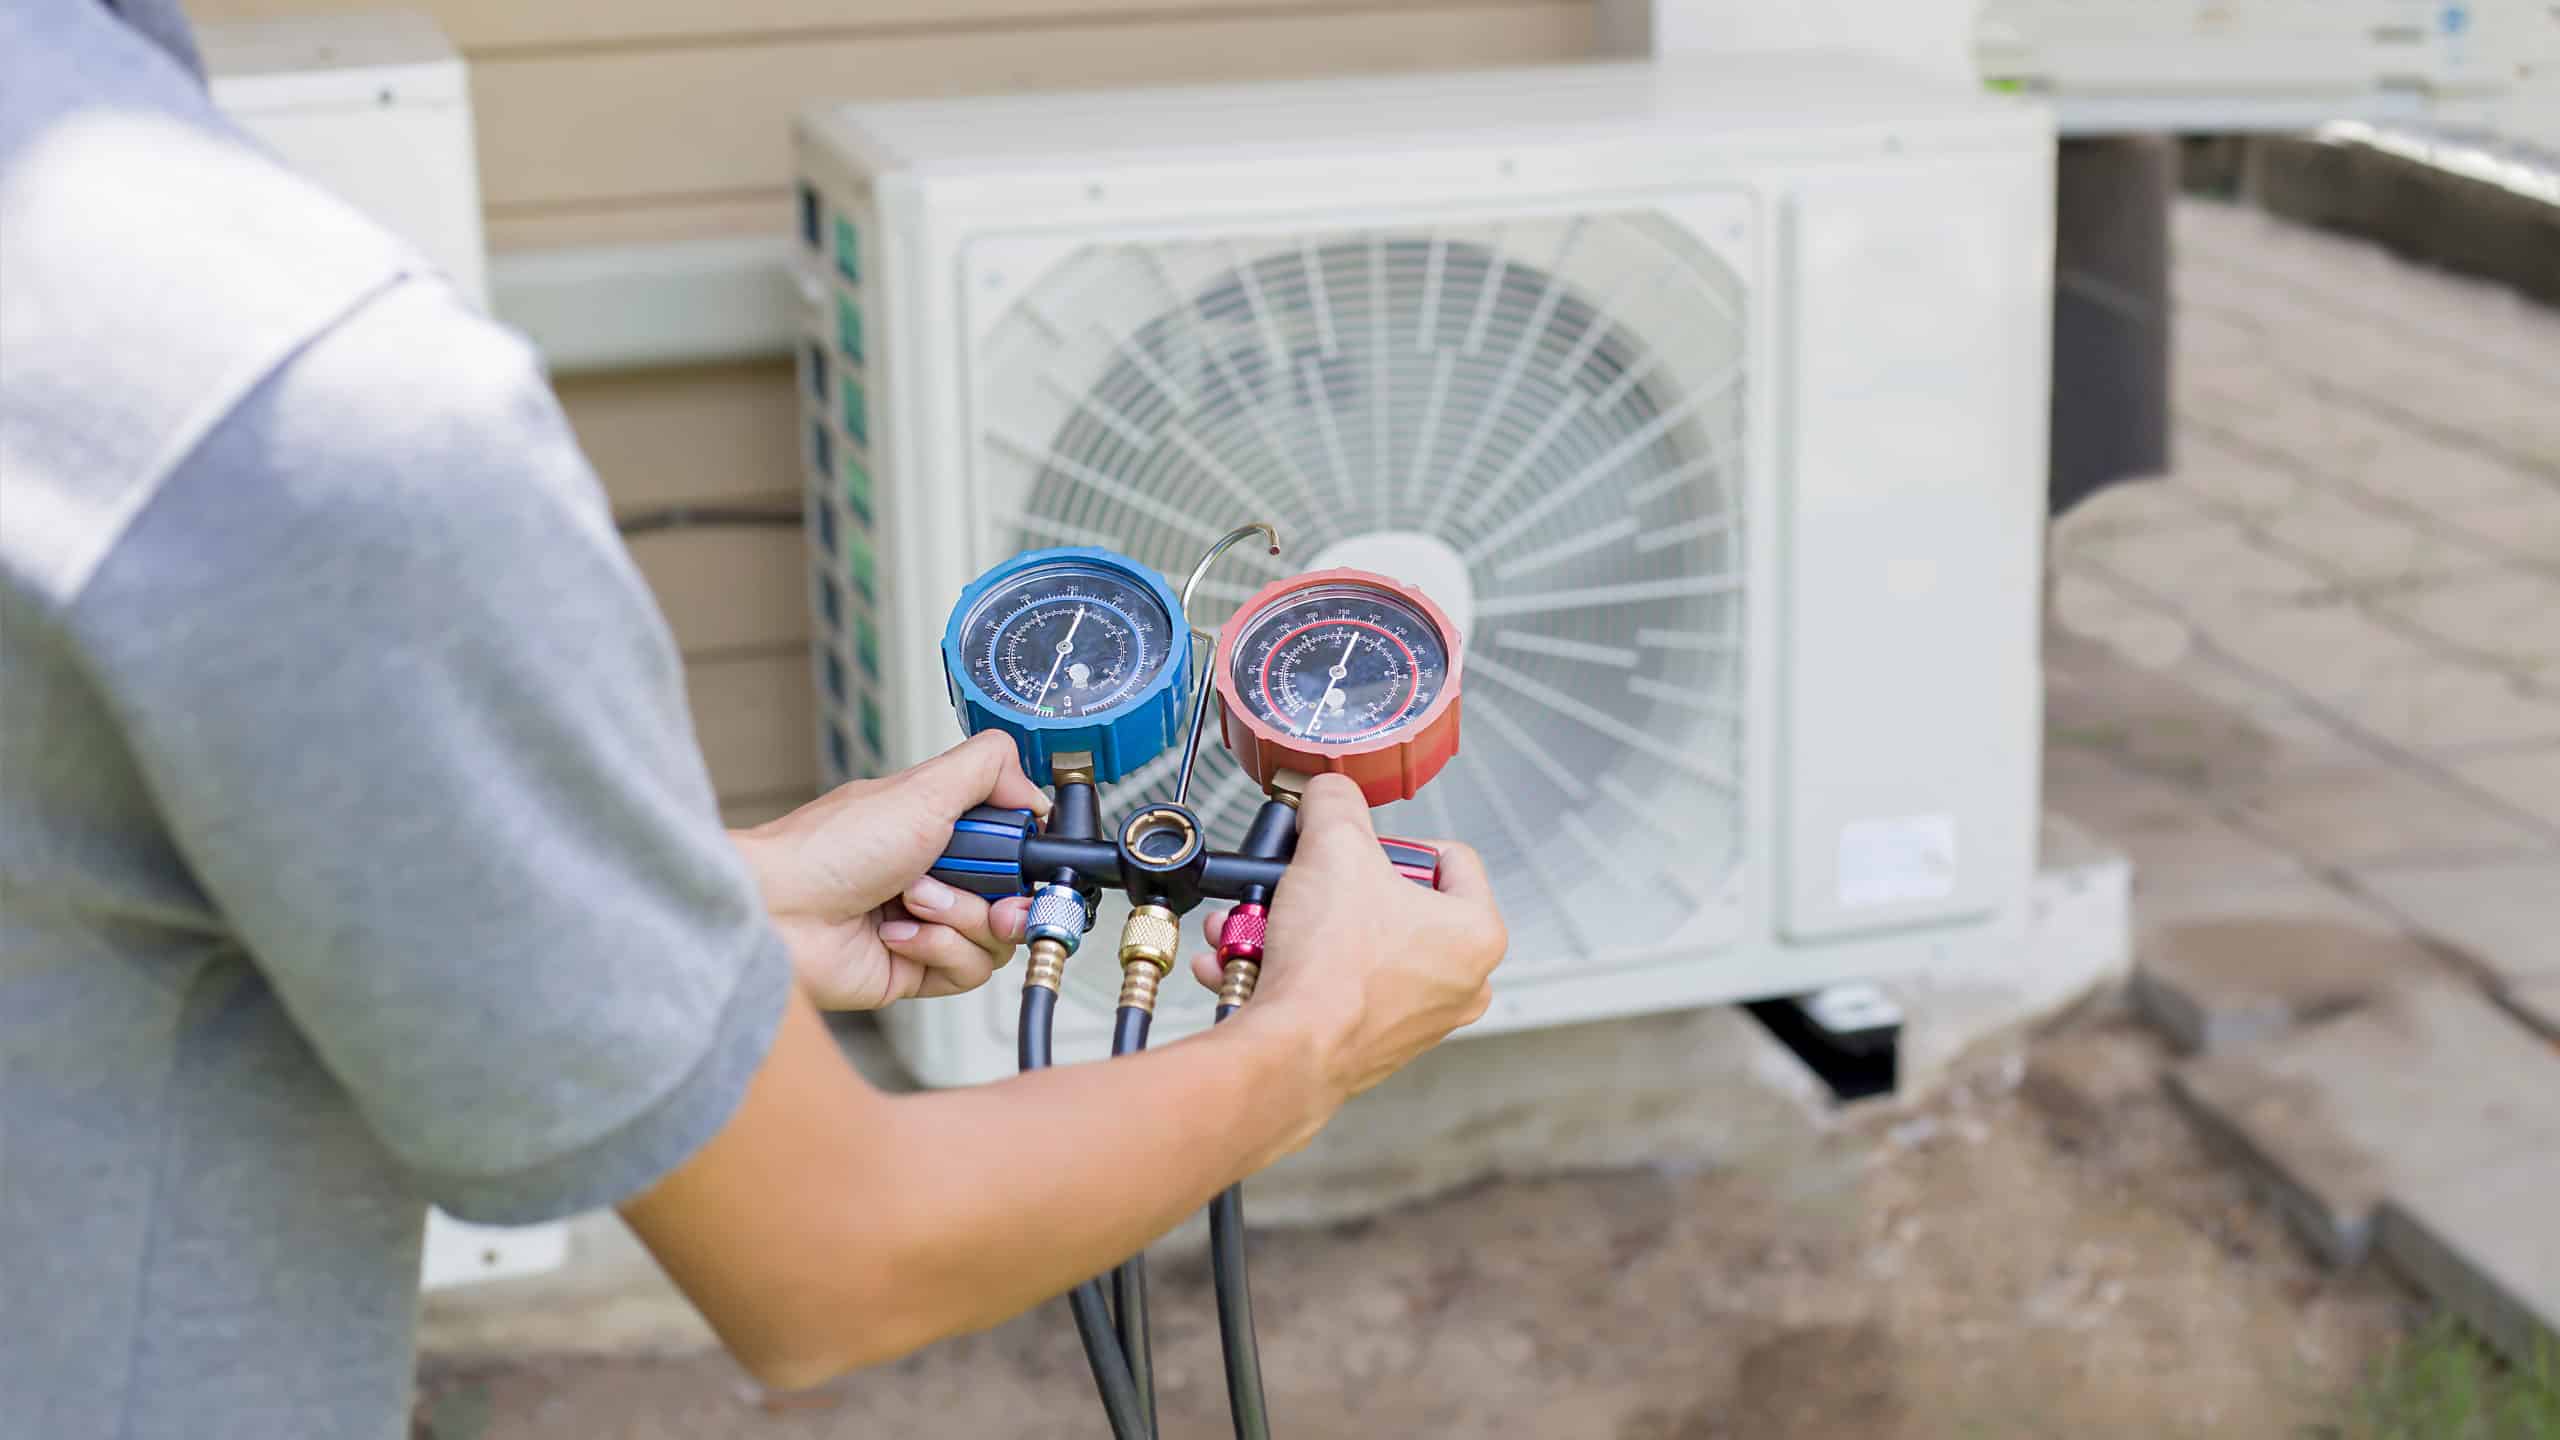 air conditioning repair in conroe texas, air conditioner repair services. ac being repaired by technician